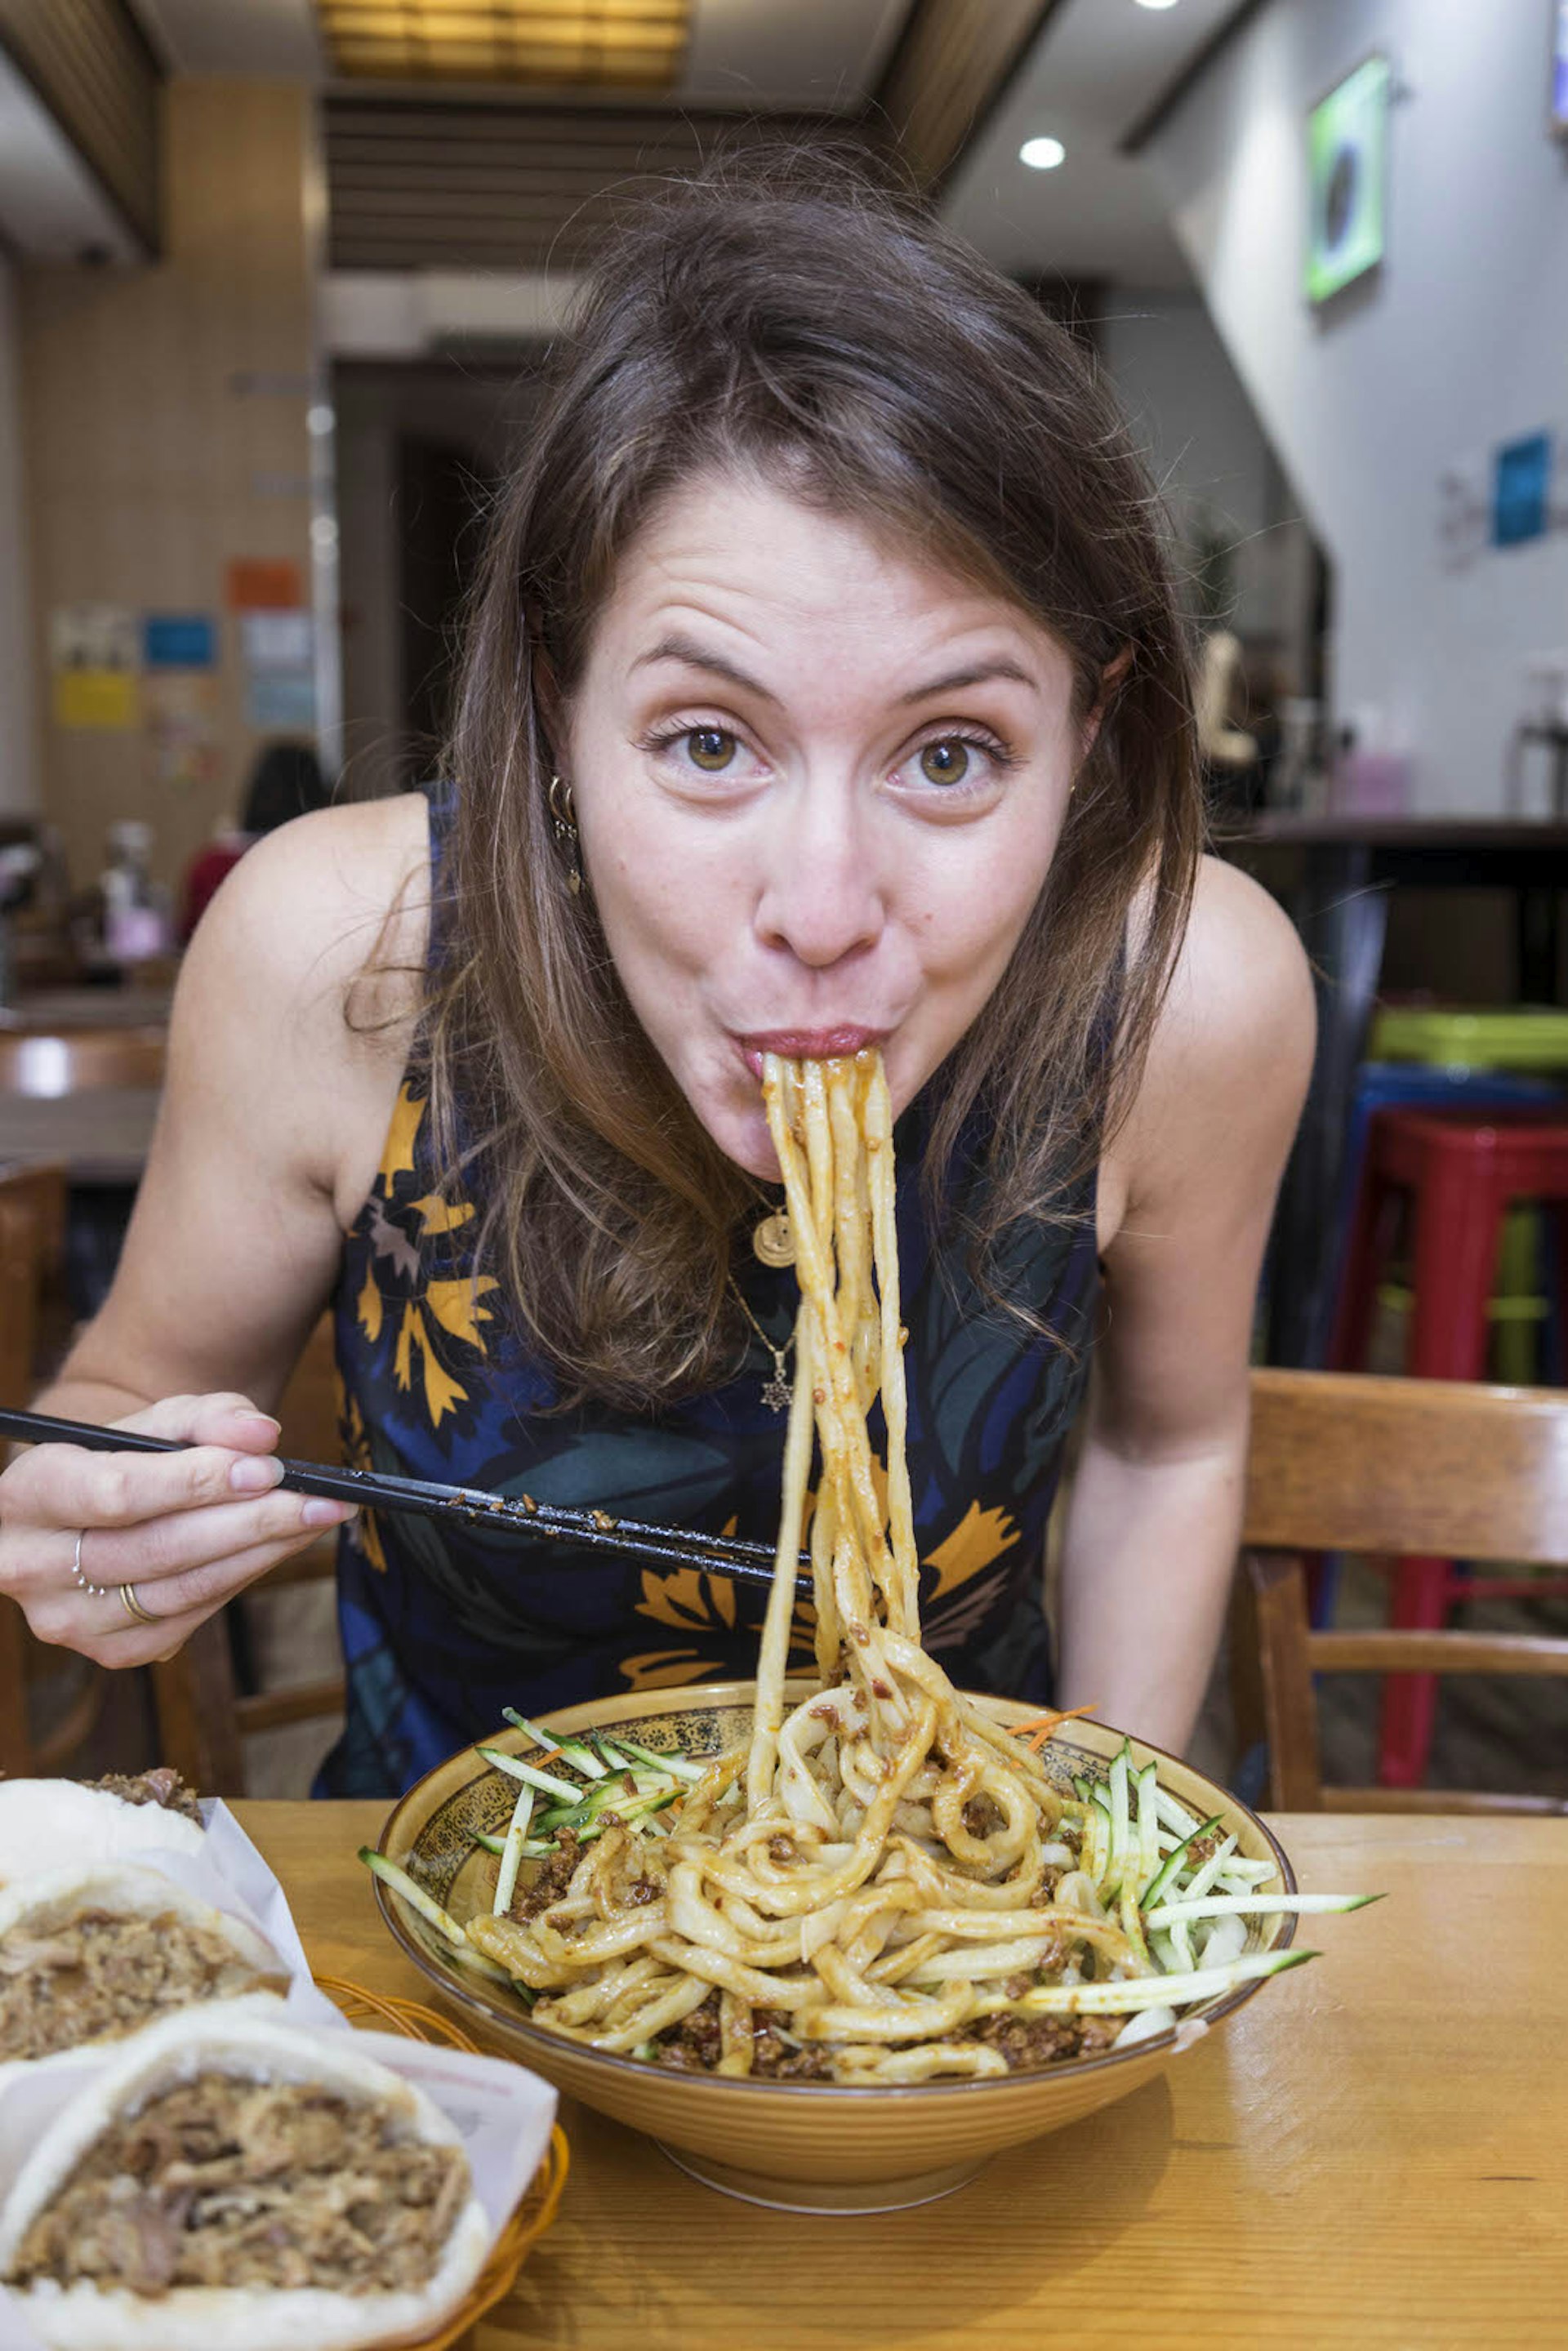 Sofia Levin biting into a mouthful of saucy noodles, looking into the camera with chopsticks in her hand. There are two other side dishes on the table and the restaurant is blurred in the background. 